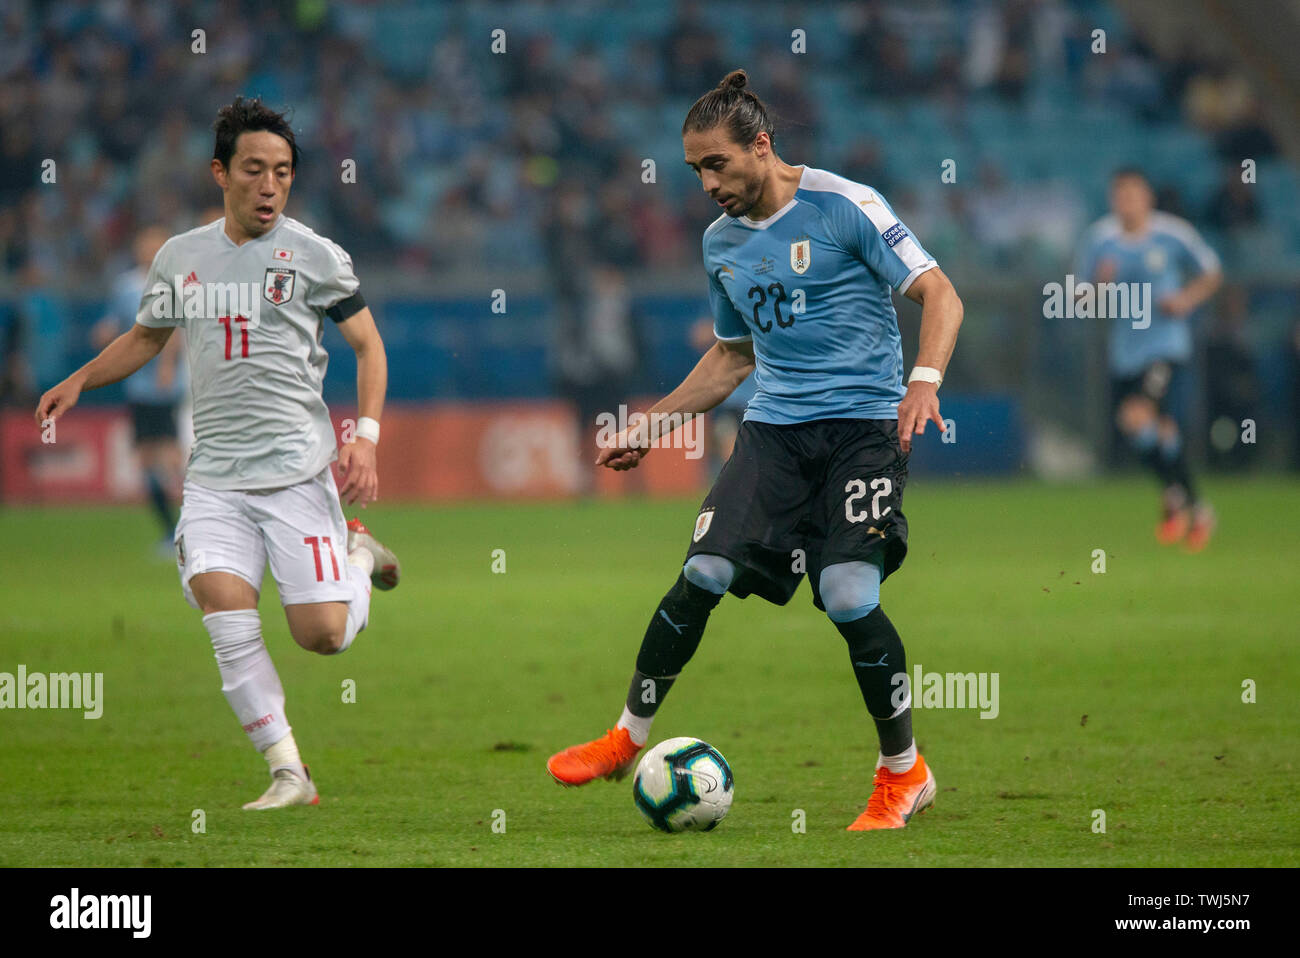 Porto Alegre, Brazil. 20th June, 2019. Martín Cáceres bid during a match between Uruguay and Japan, valid for the 2019 Copa America group stage, held this Thursday (20) at the Grêmio Arena in Porto Alegre, RS. Credit: Raul Pereira/FotoArena/Alamy Live News Stock Photo